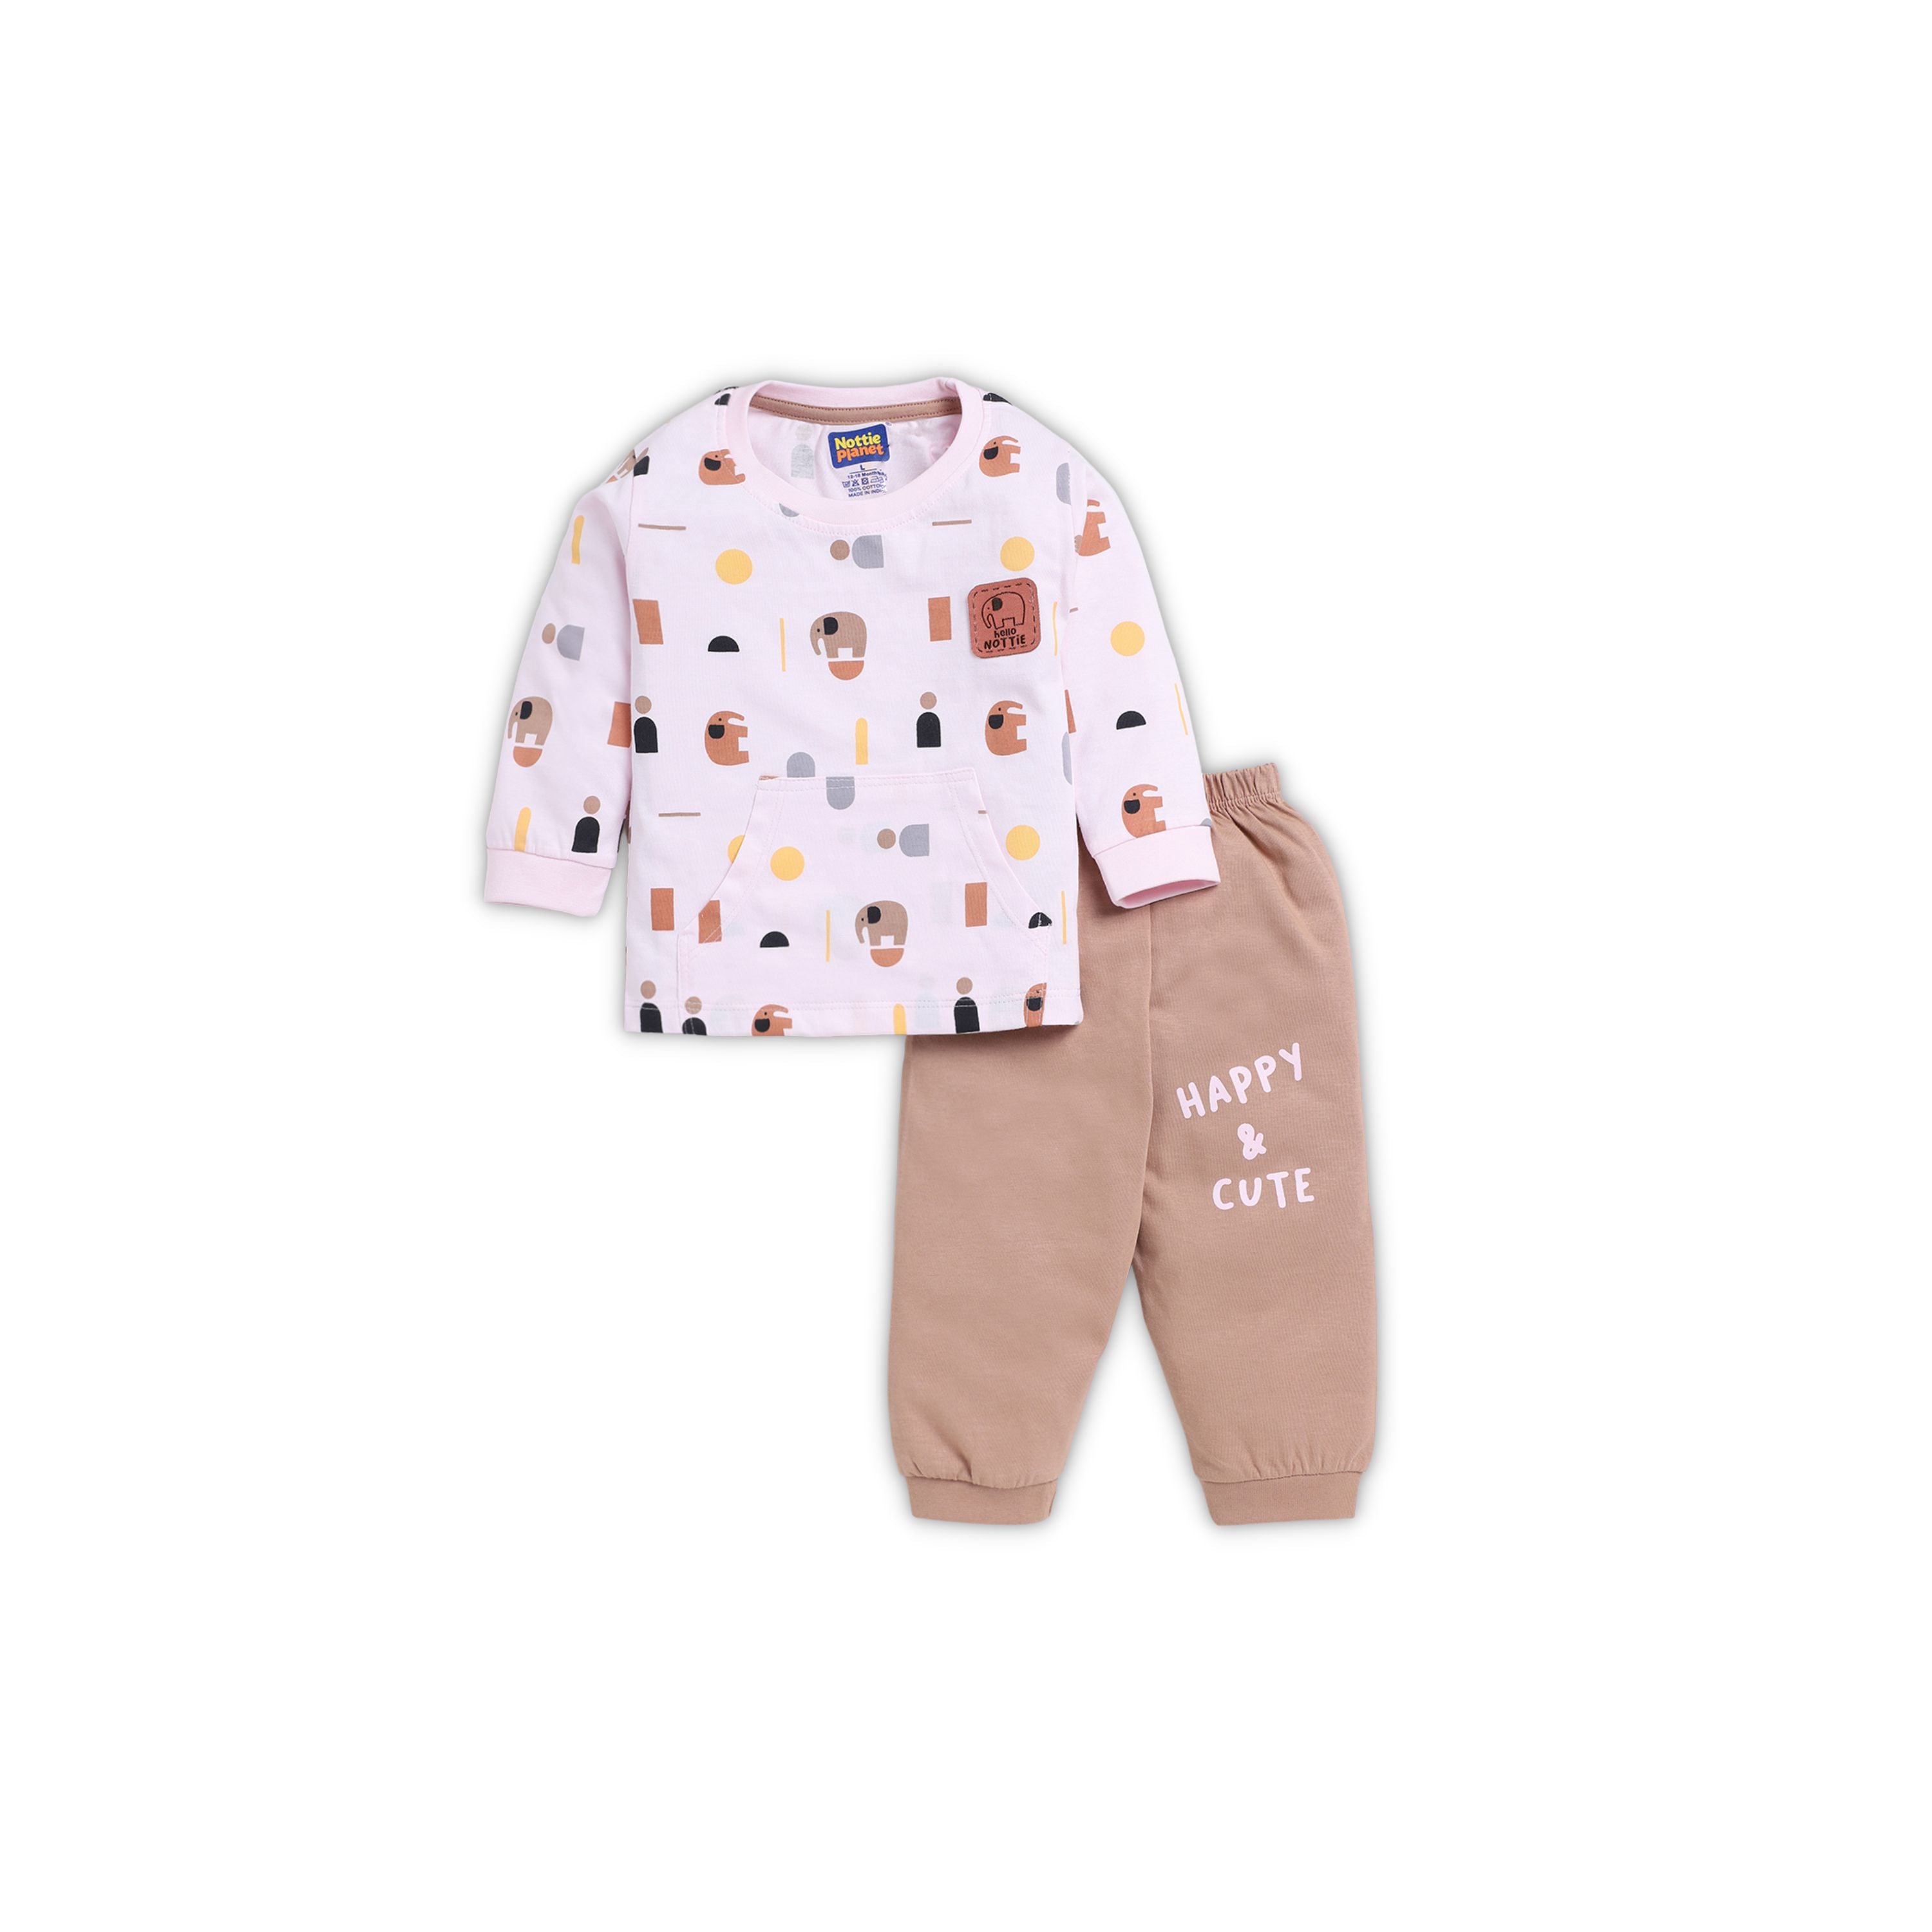 CLOTHING SET FOR BOY - PINK